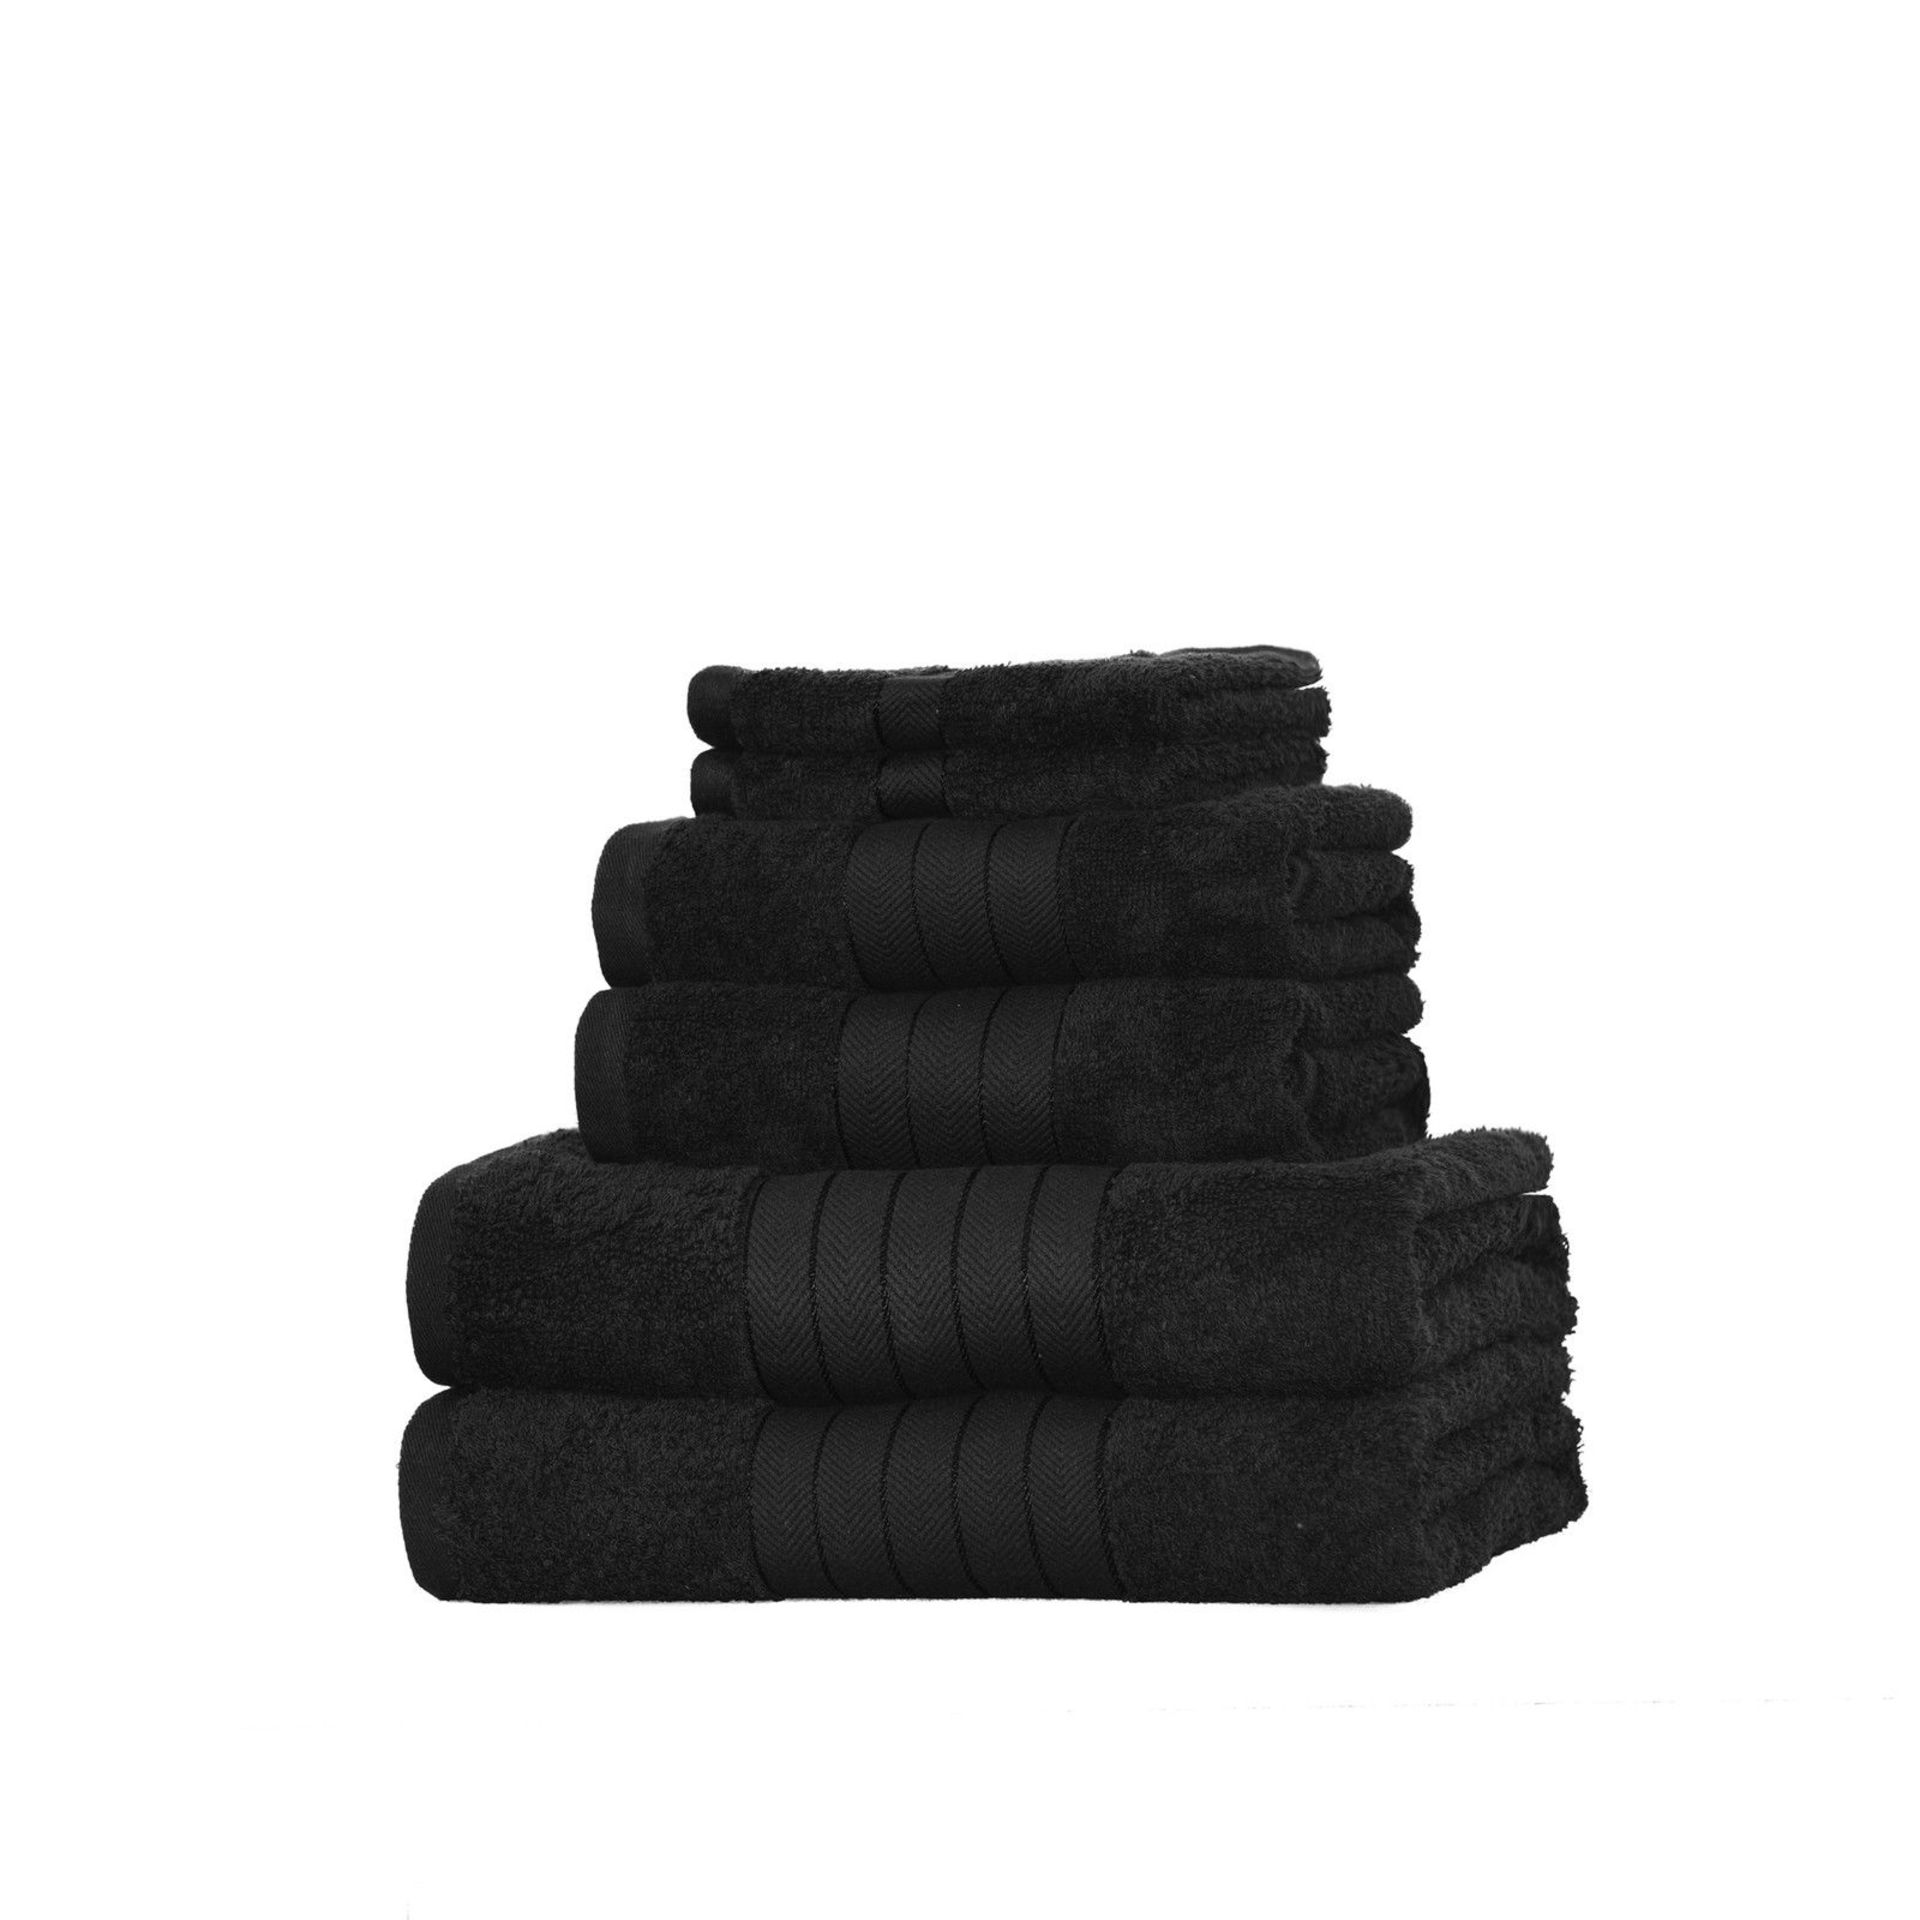 V Brand New Black 6 Piece Towel Bale Set With 2 Face Towels - 2 Hand Towels - 1 Bath Sheet - 1